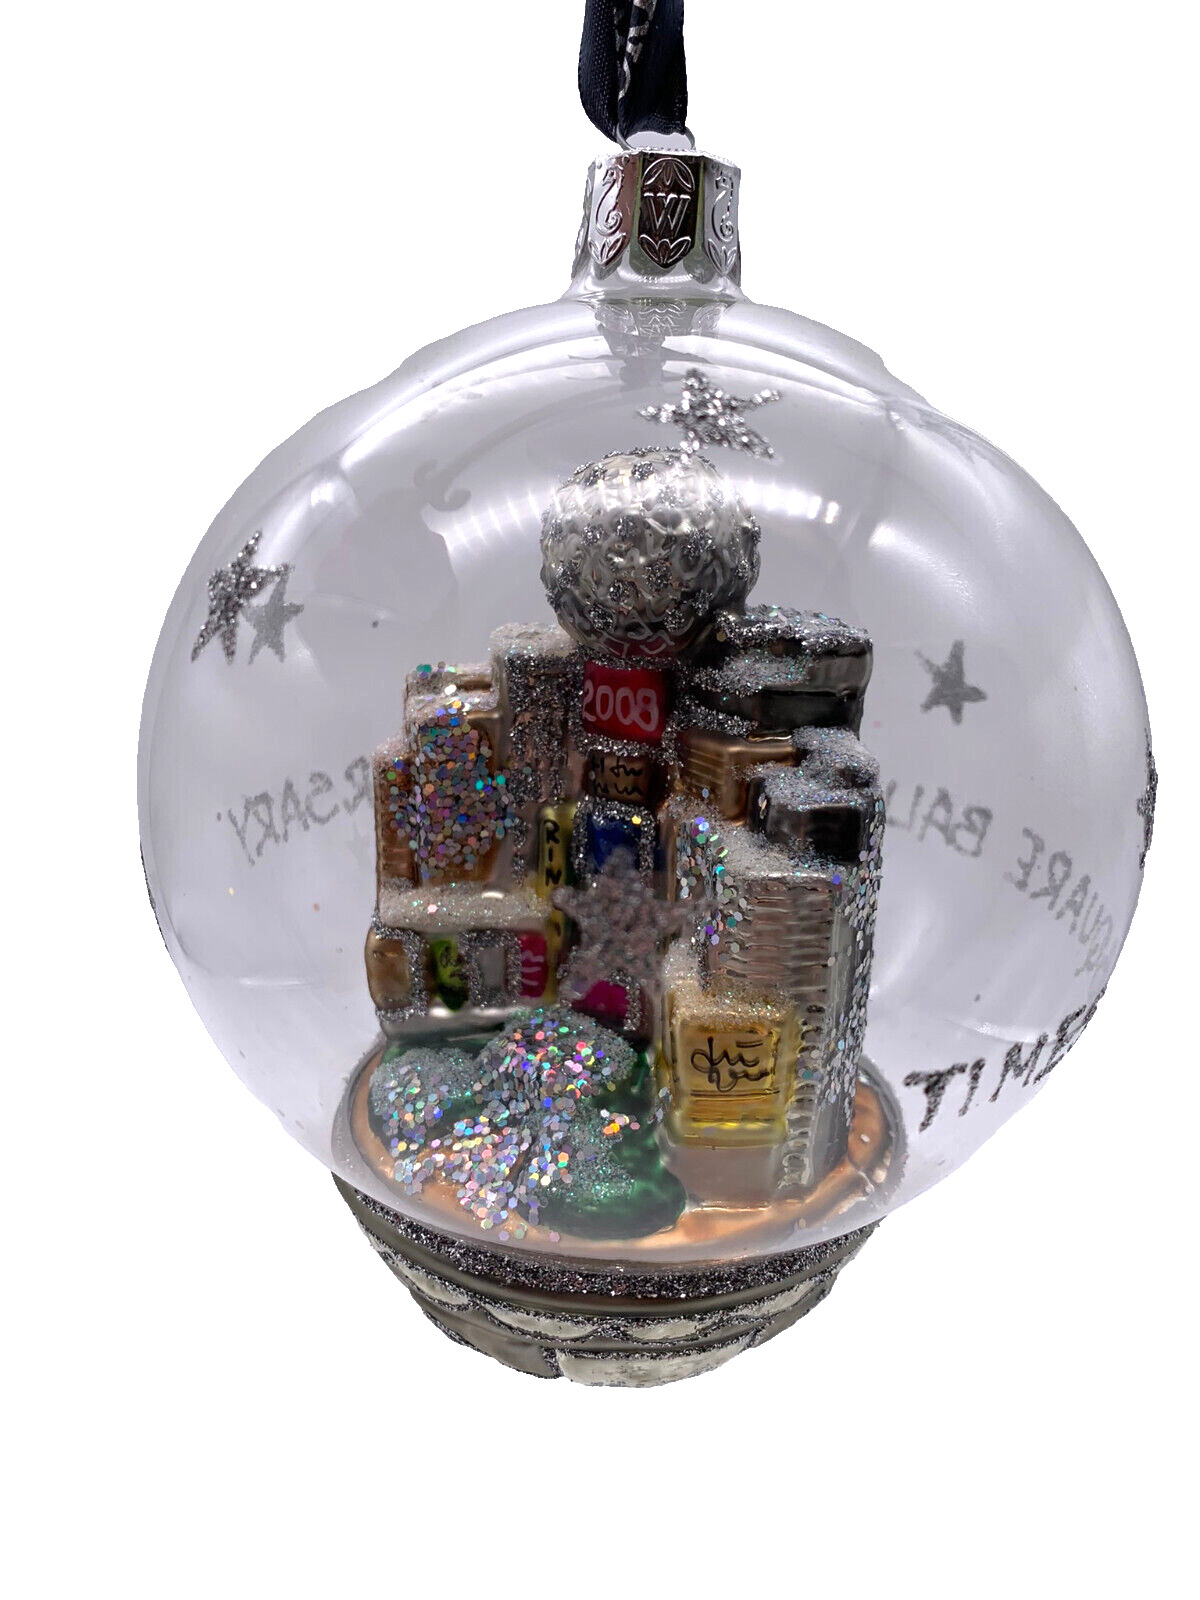 Rare 2008 Waterford Times Square 100 Anniversary Ball Drop Christmas Ornament